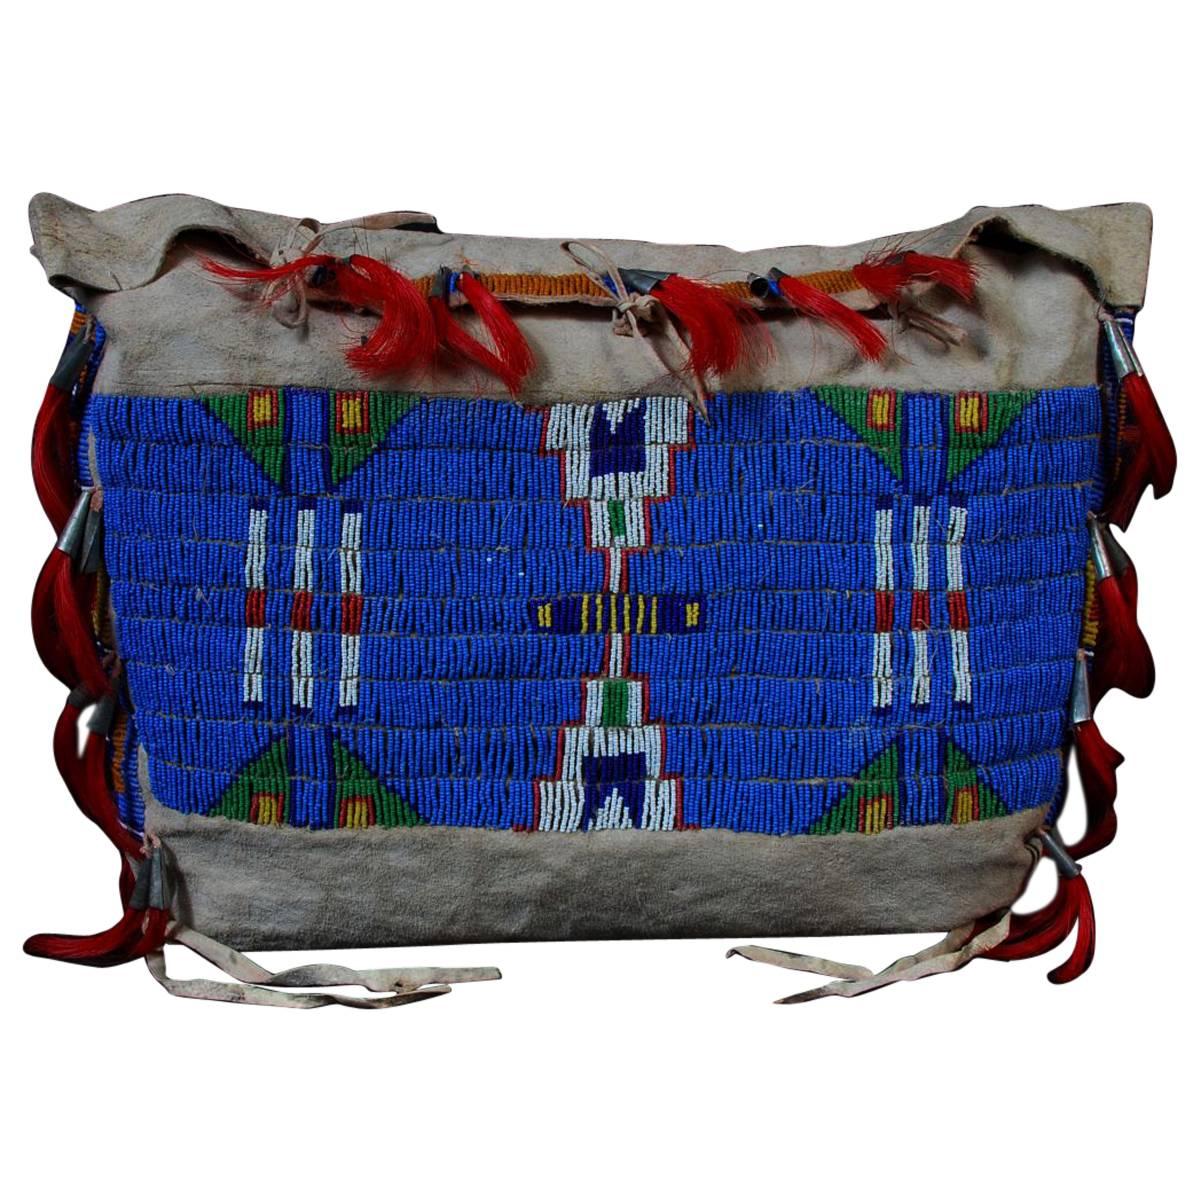 Late 19th Century Native American Tribal Beaded Leather Bag